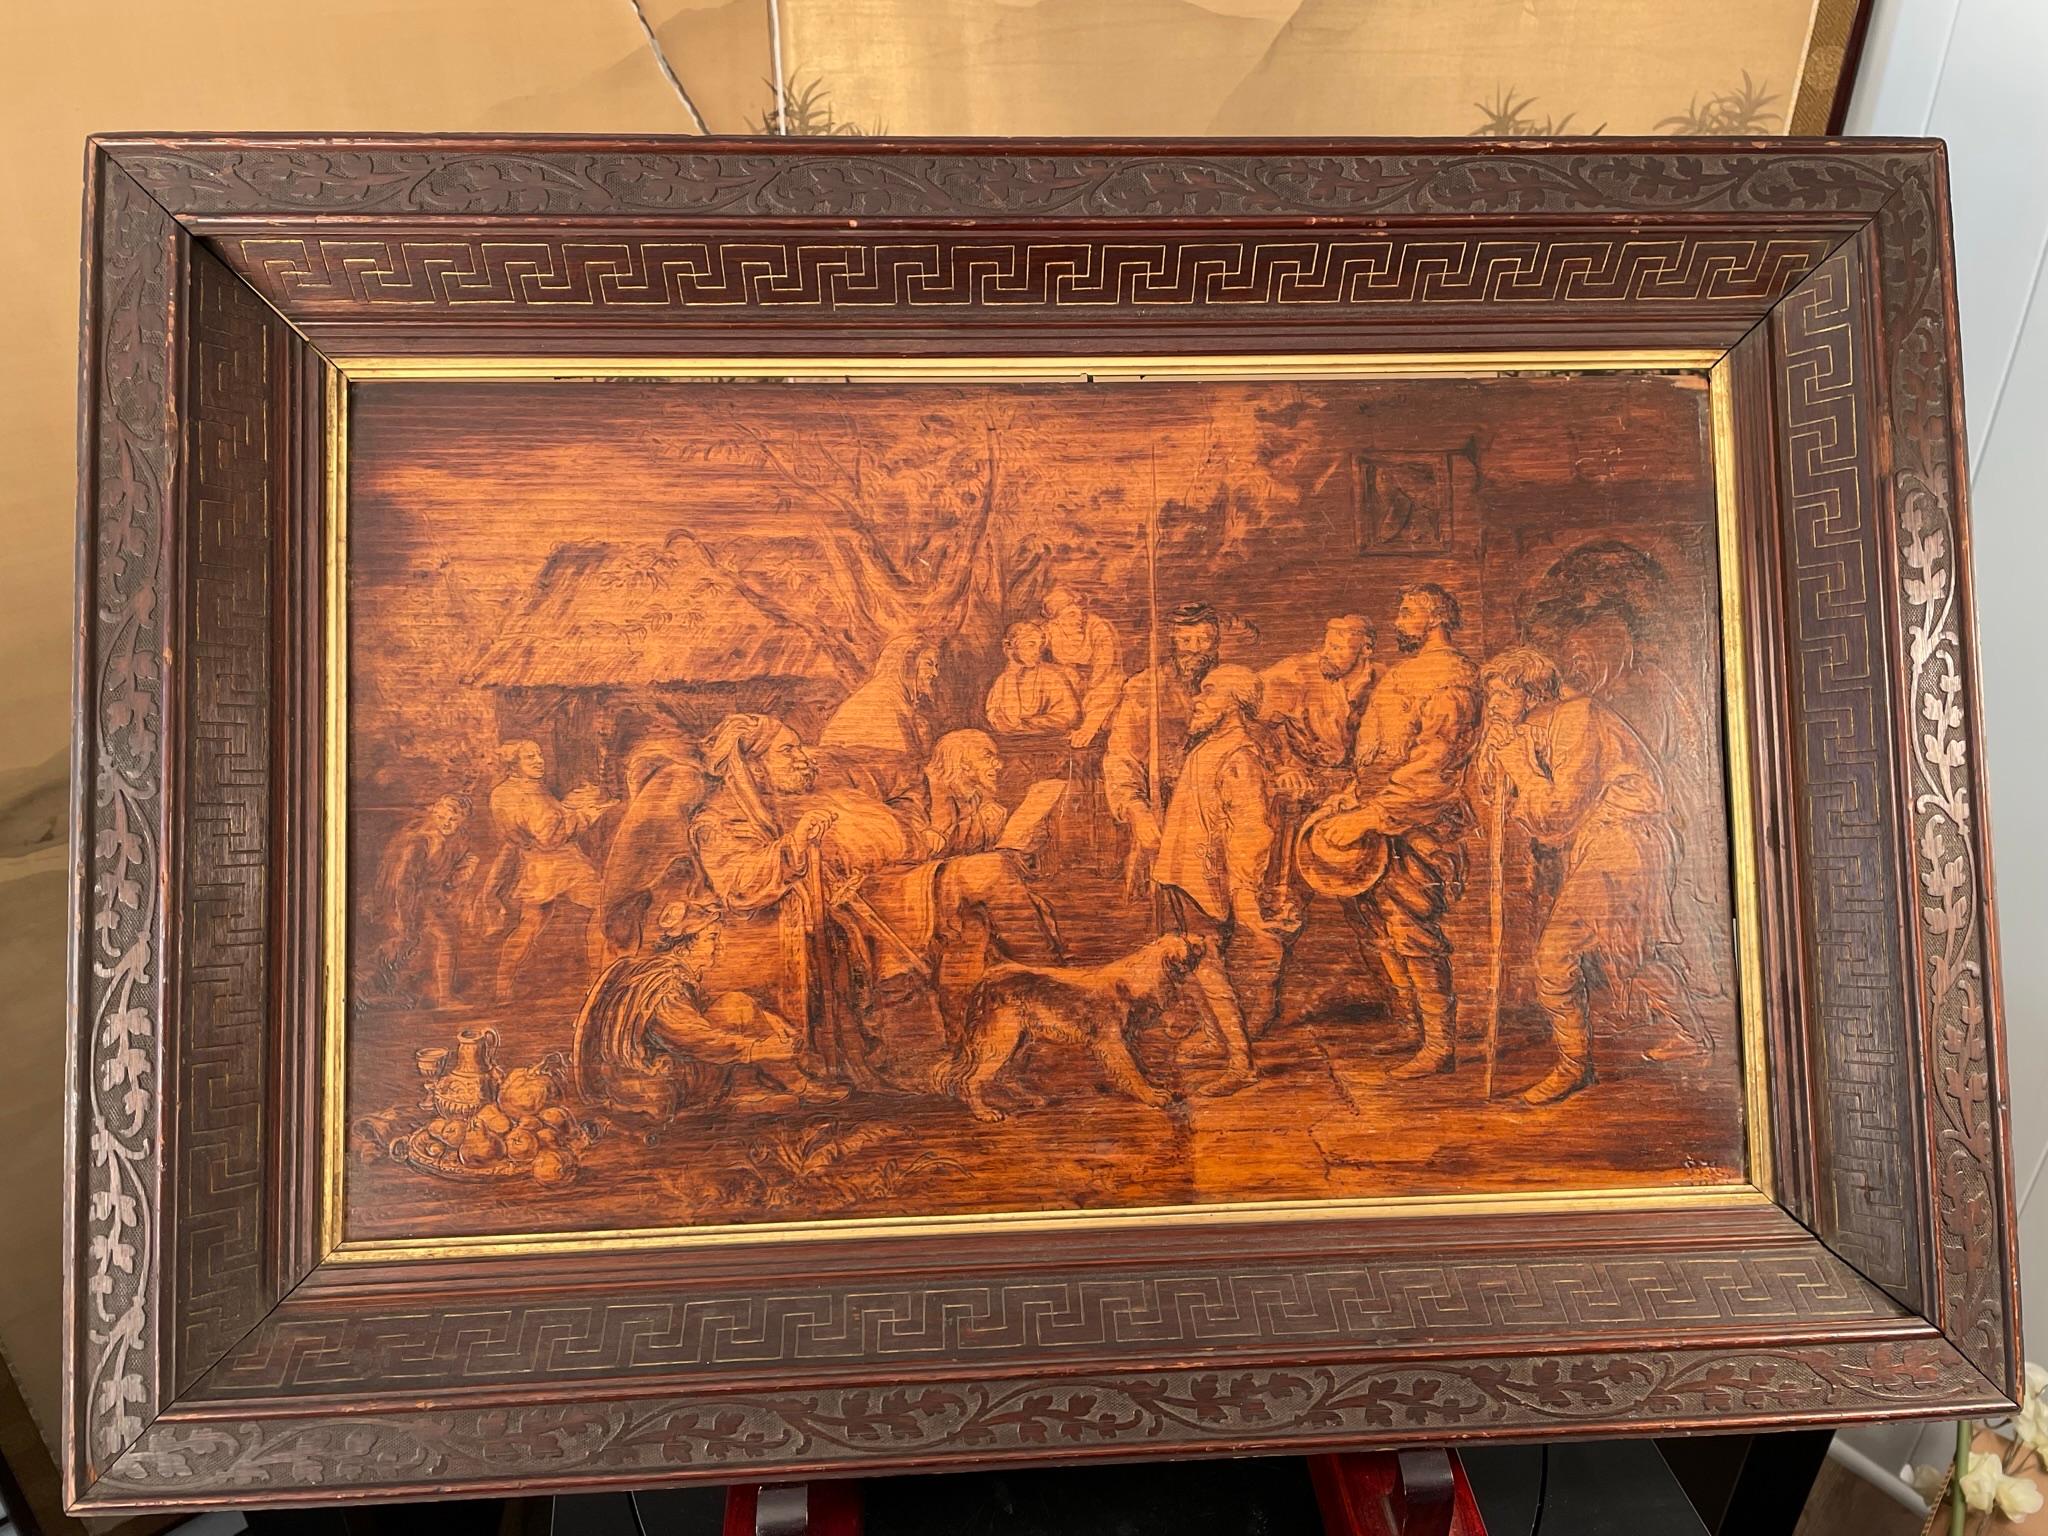 From an important thirty year old New England collection of American Folk Art Pyrography

Robert Ball Hughes (British-American, 1804-1868) 
This original period framed 1866 pyrography on wood panel was created after the painting by Sir John